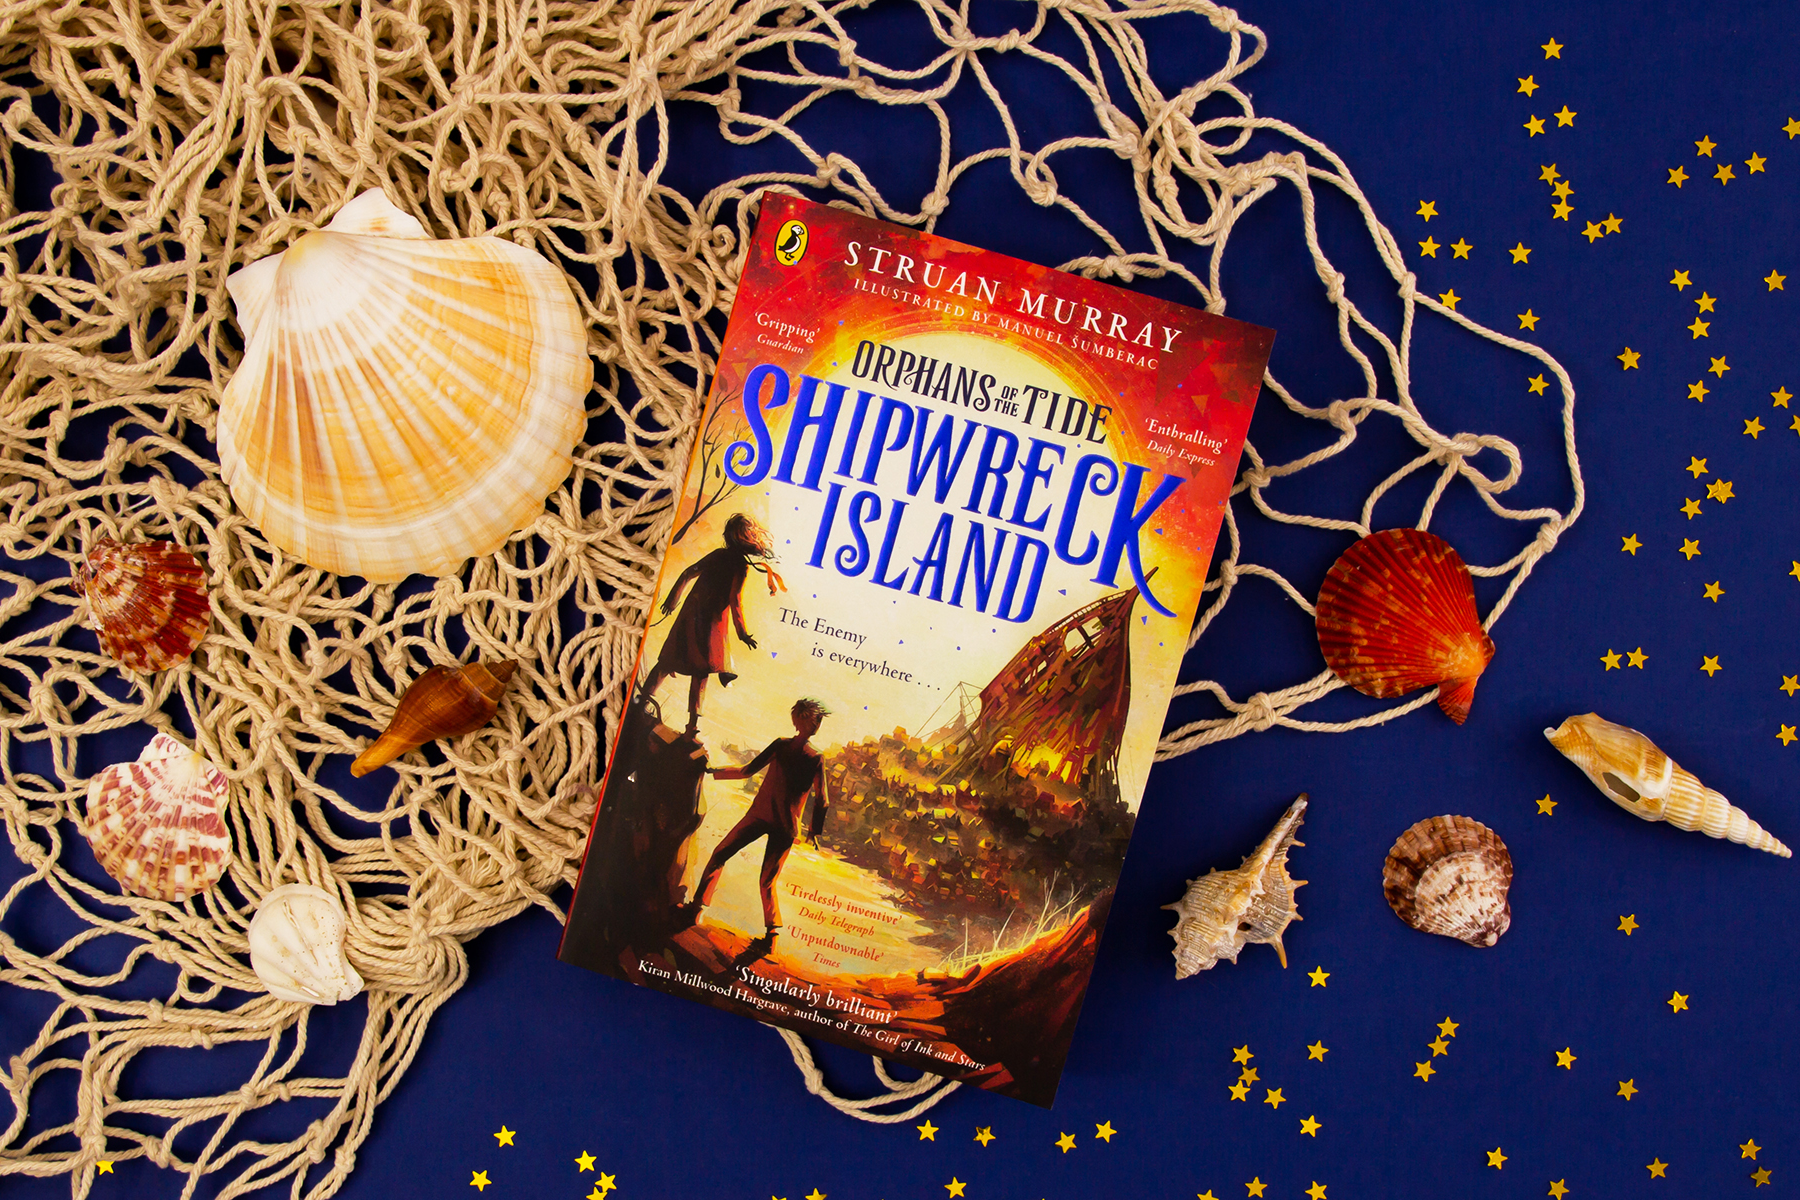 A photo of the book Shipwreck Island by Struan Murray on a dark blue background surrounded by a fishing net and shells